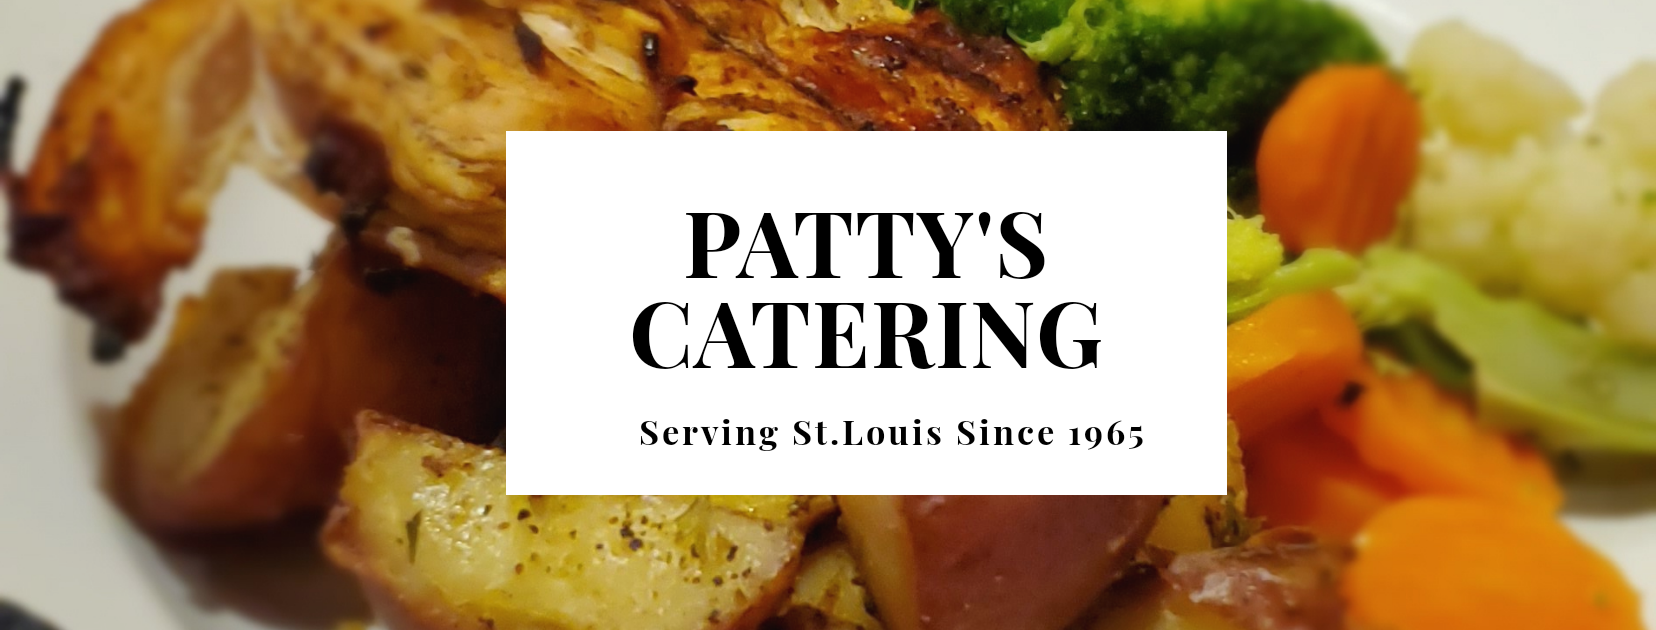 Pattys Catering